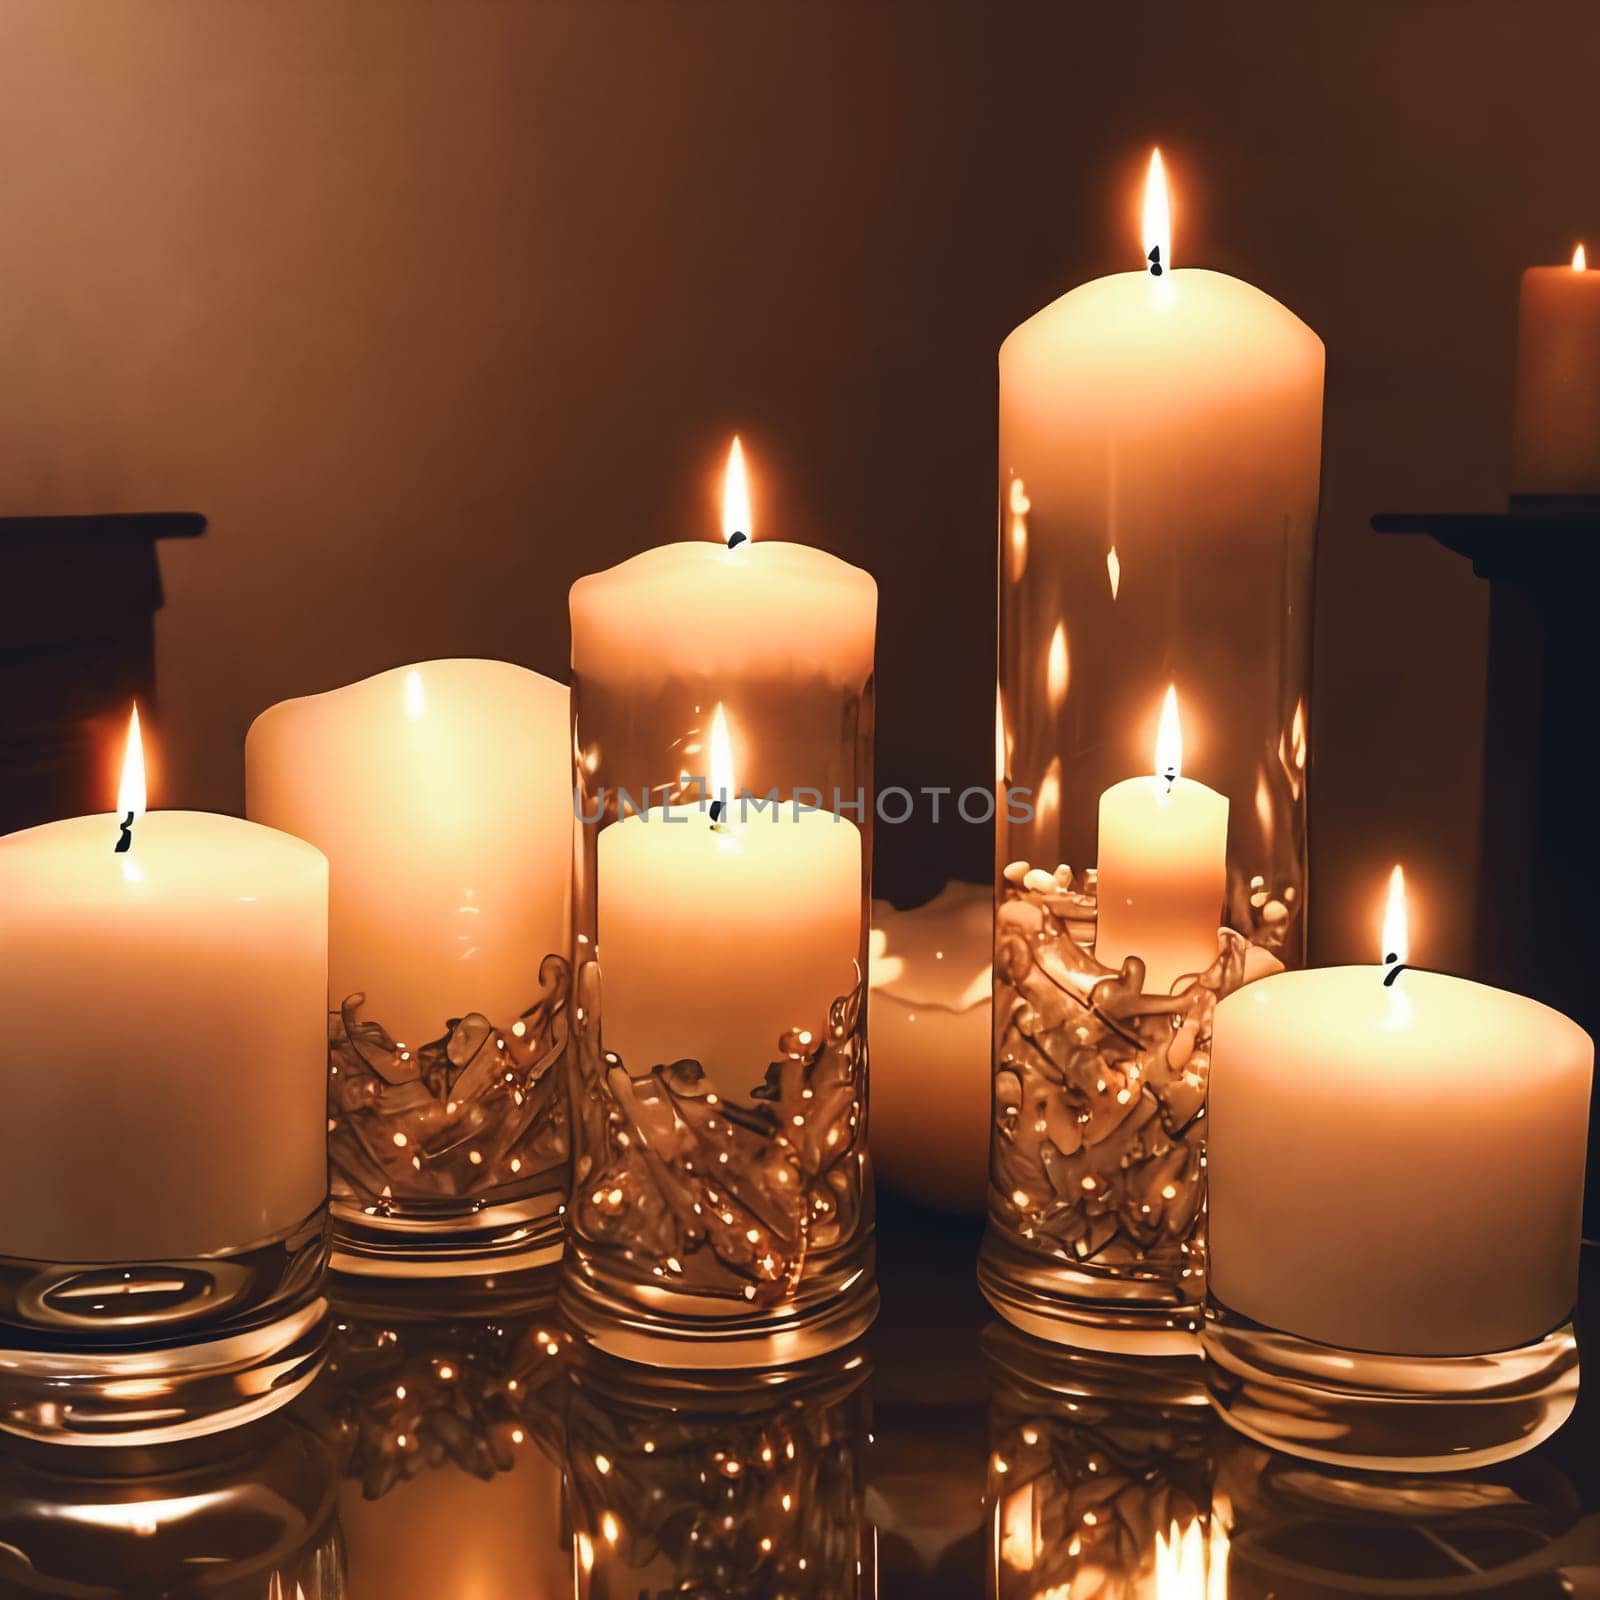 Cluster of scented candles of various shapes and sizes arranged on a reflective surface. Soft glow and comforting allure of the candlelight to create a cozy and inviting ambiance